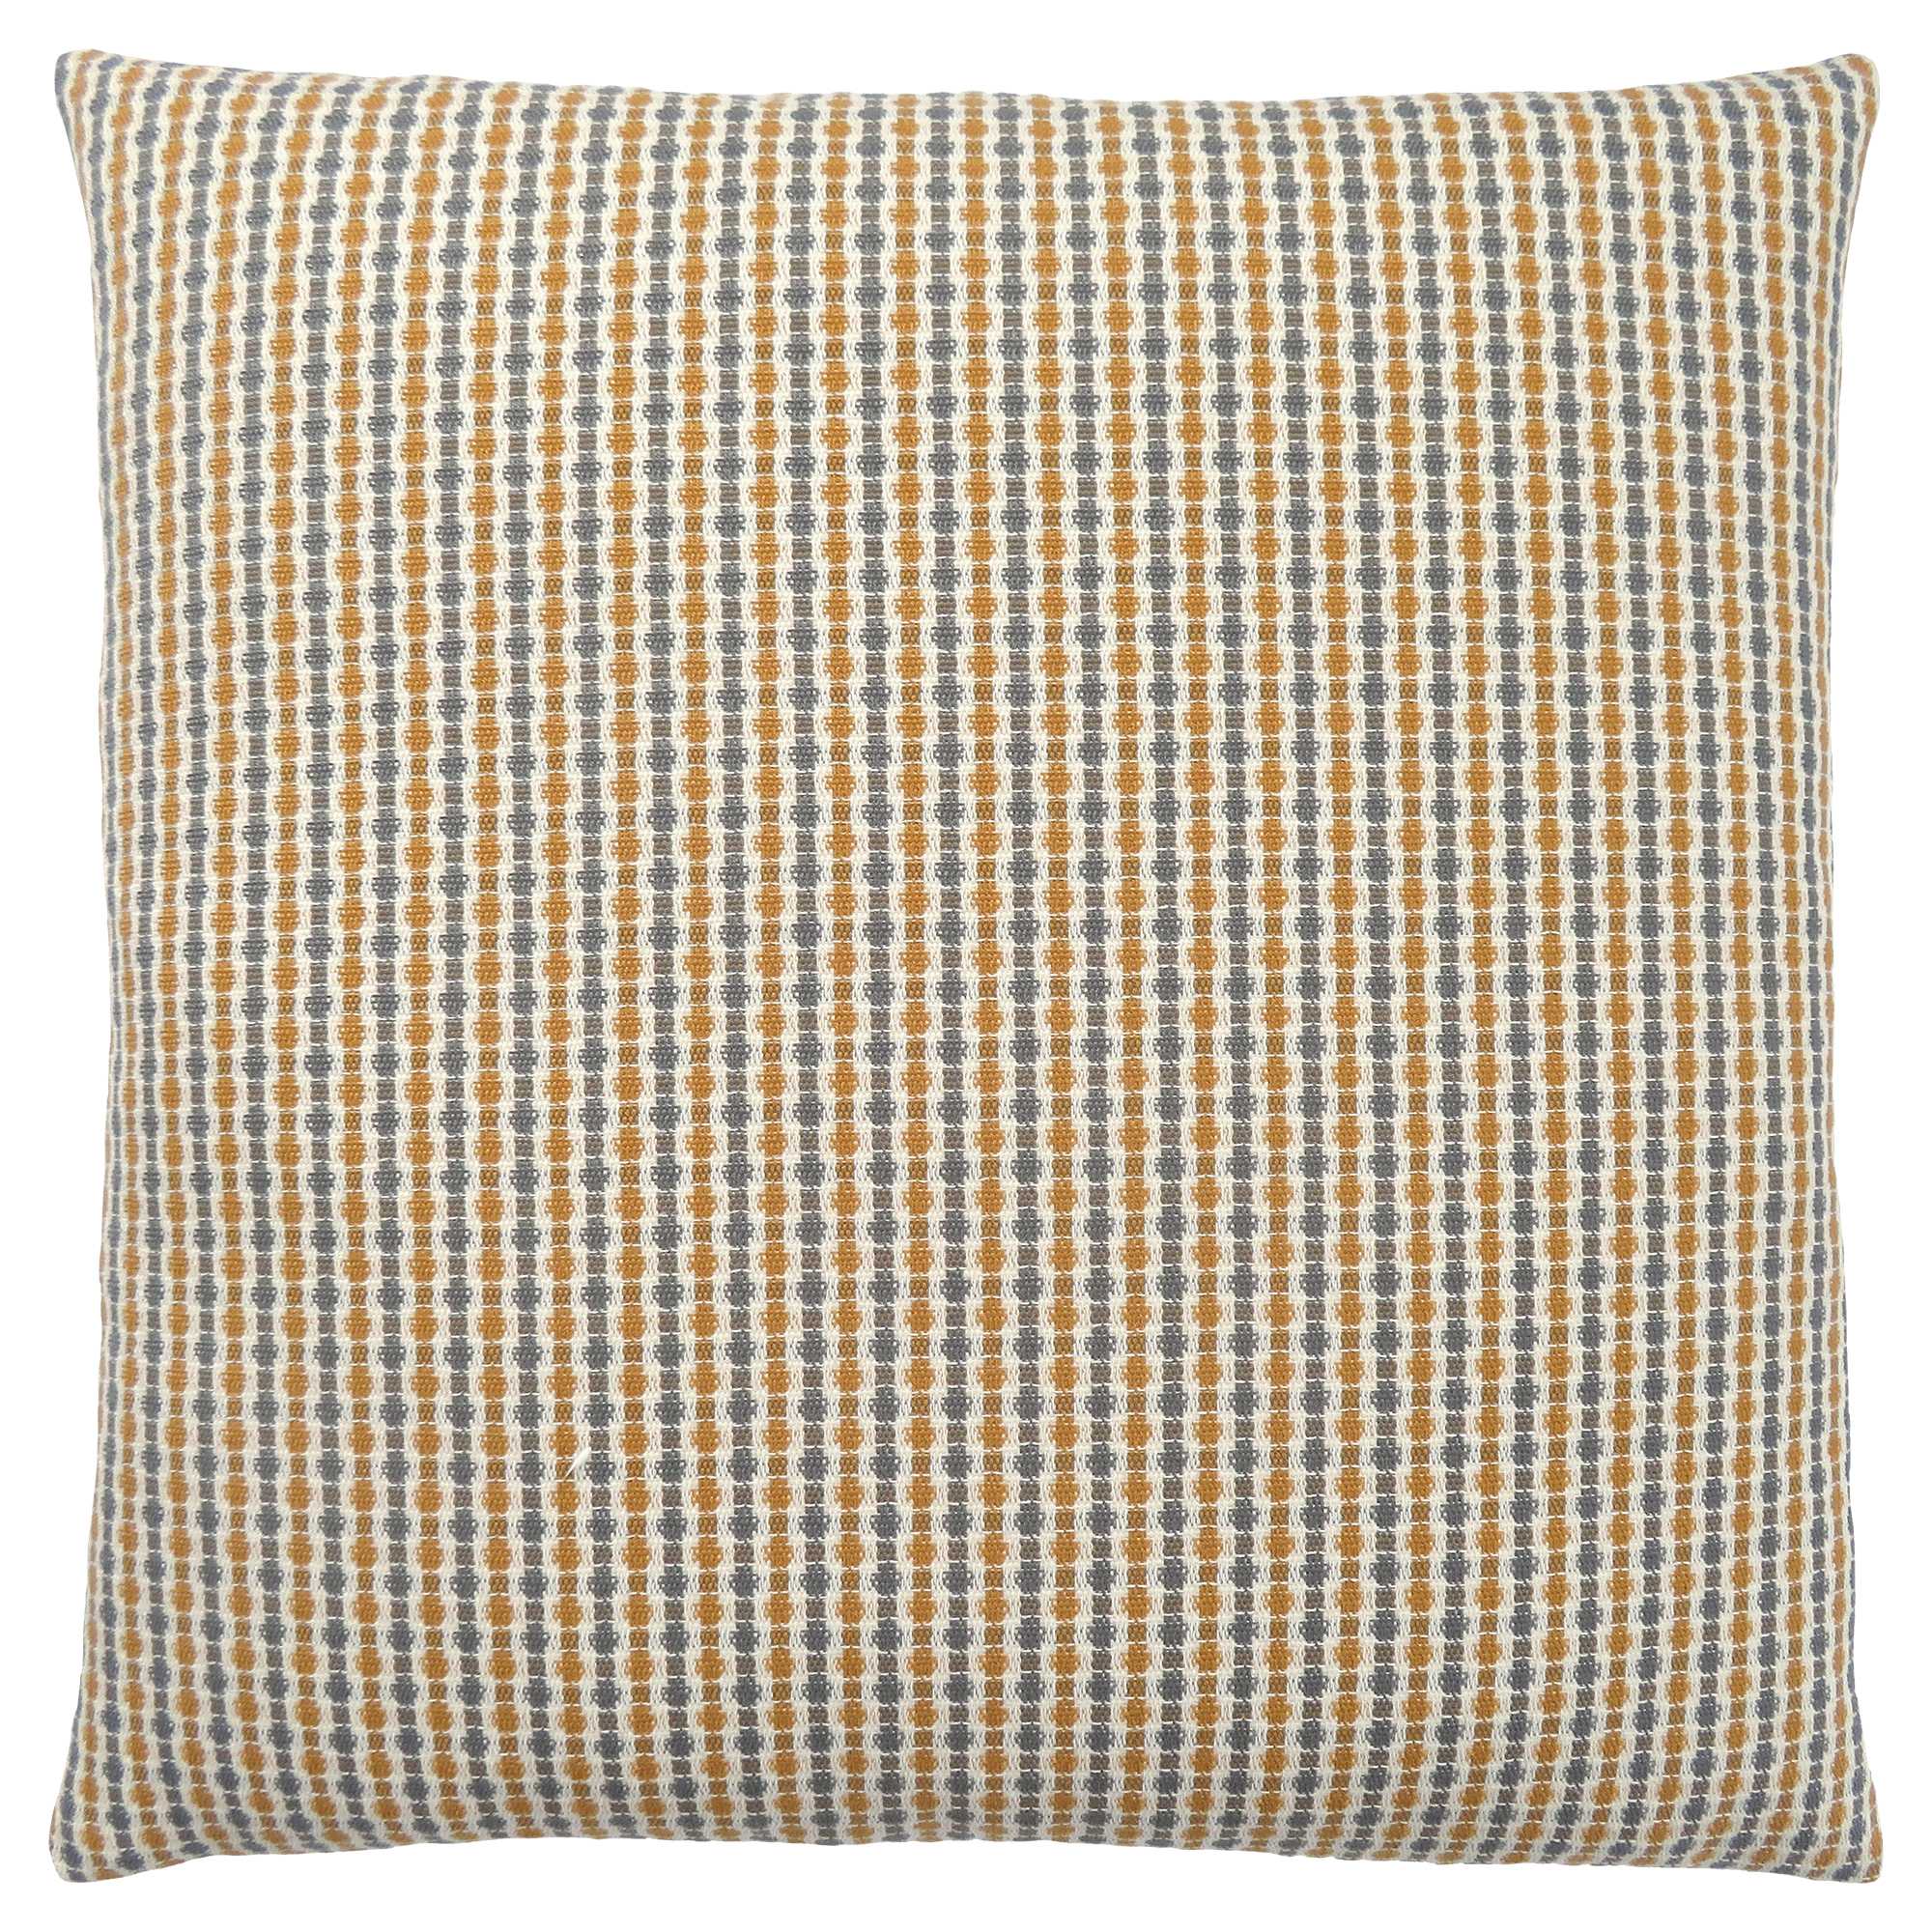 18" X 18" Gray and Gold Polyester Striped Zippered Pillow-344020-1